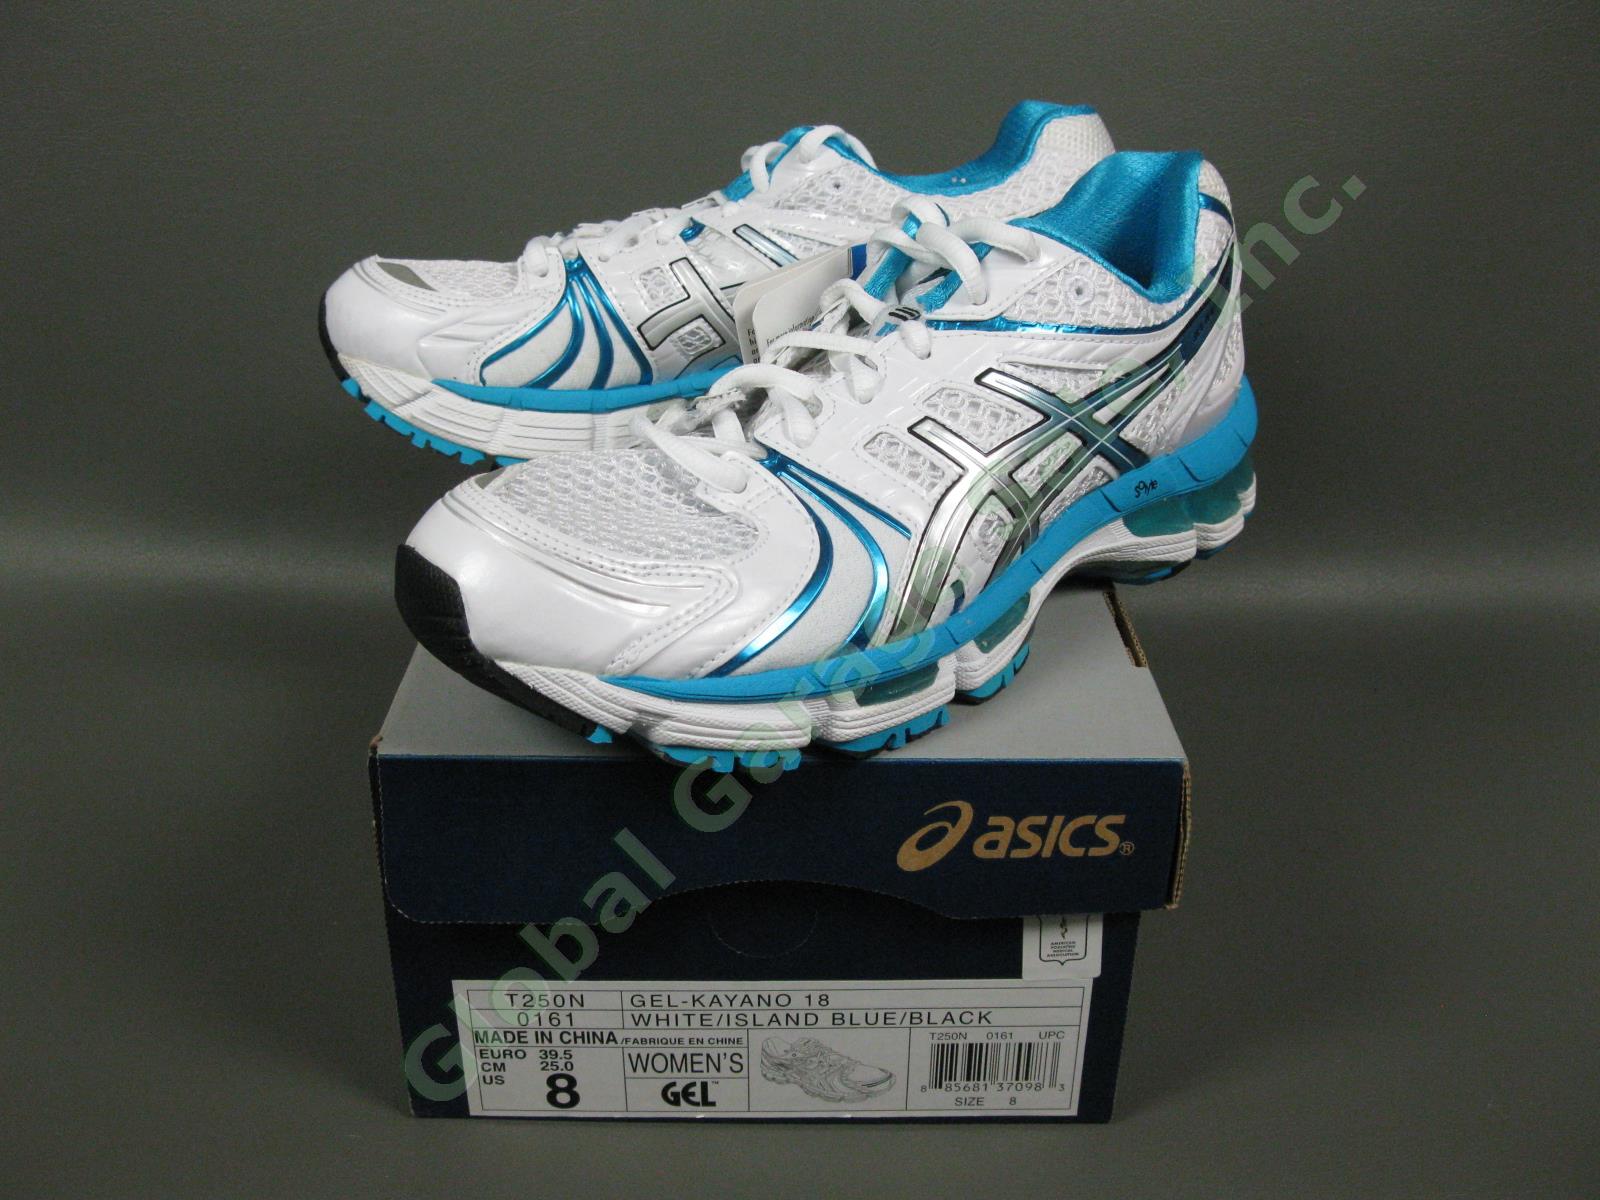 NEW Asics Gel Kayano-18 Womens White/Blue Running Sneakers Pair Size US-8 Shoes